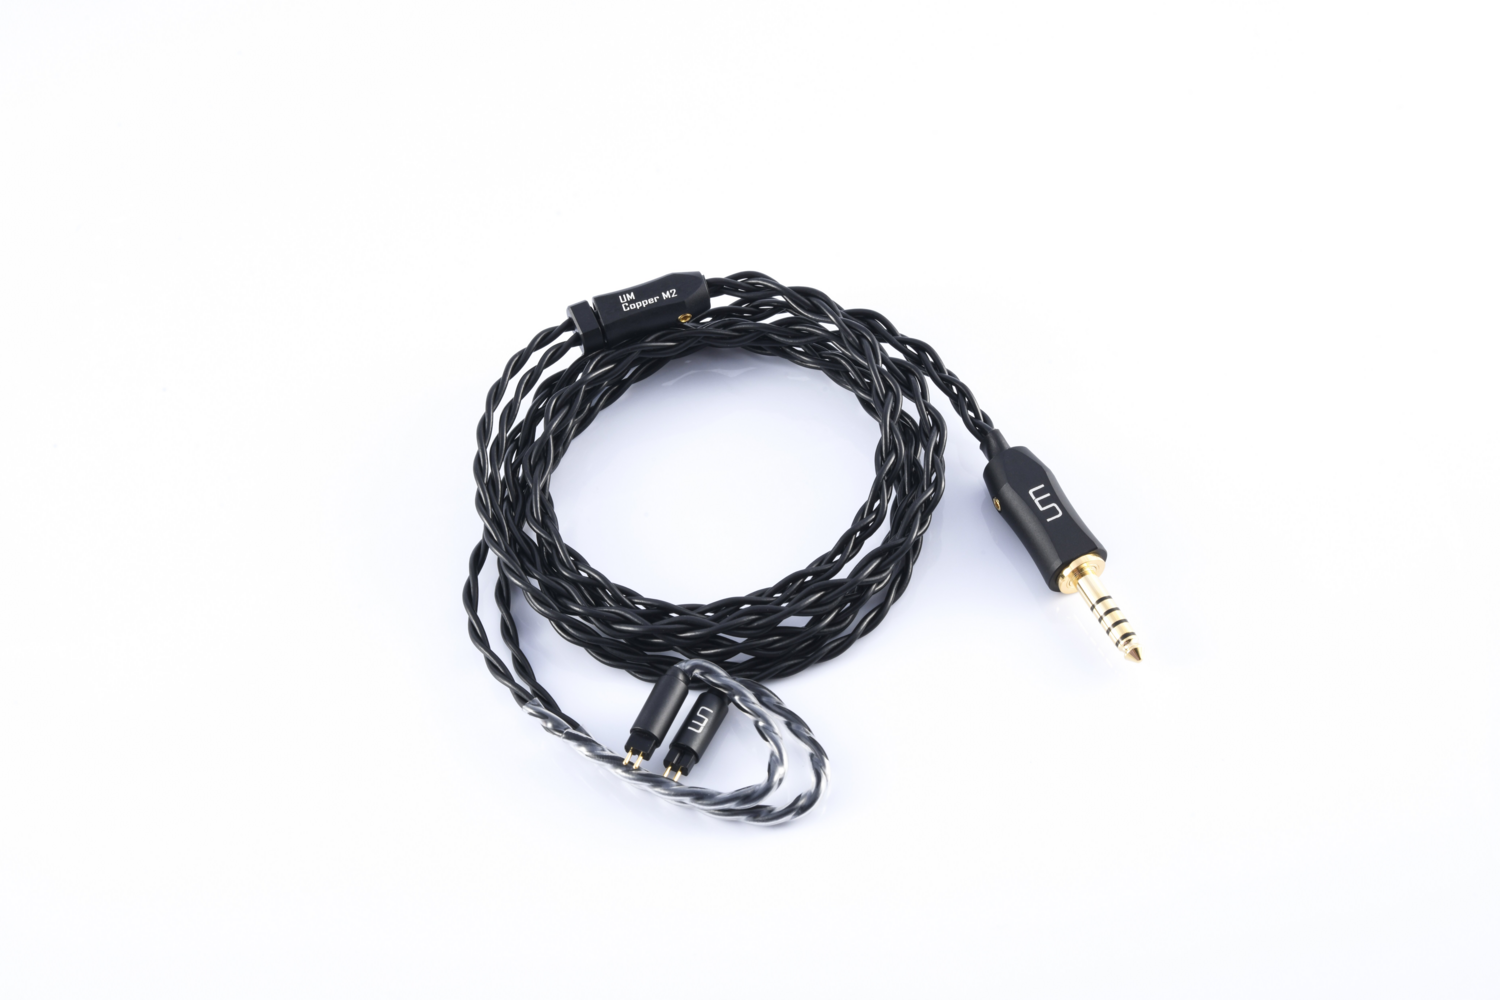 MEST MKII cable